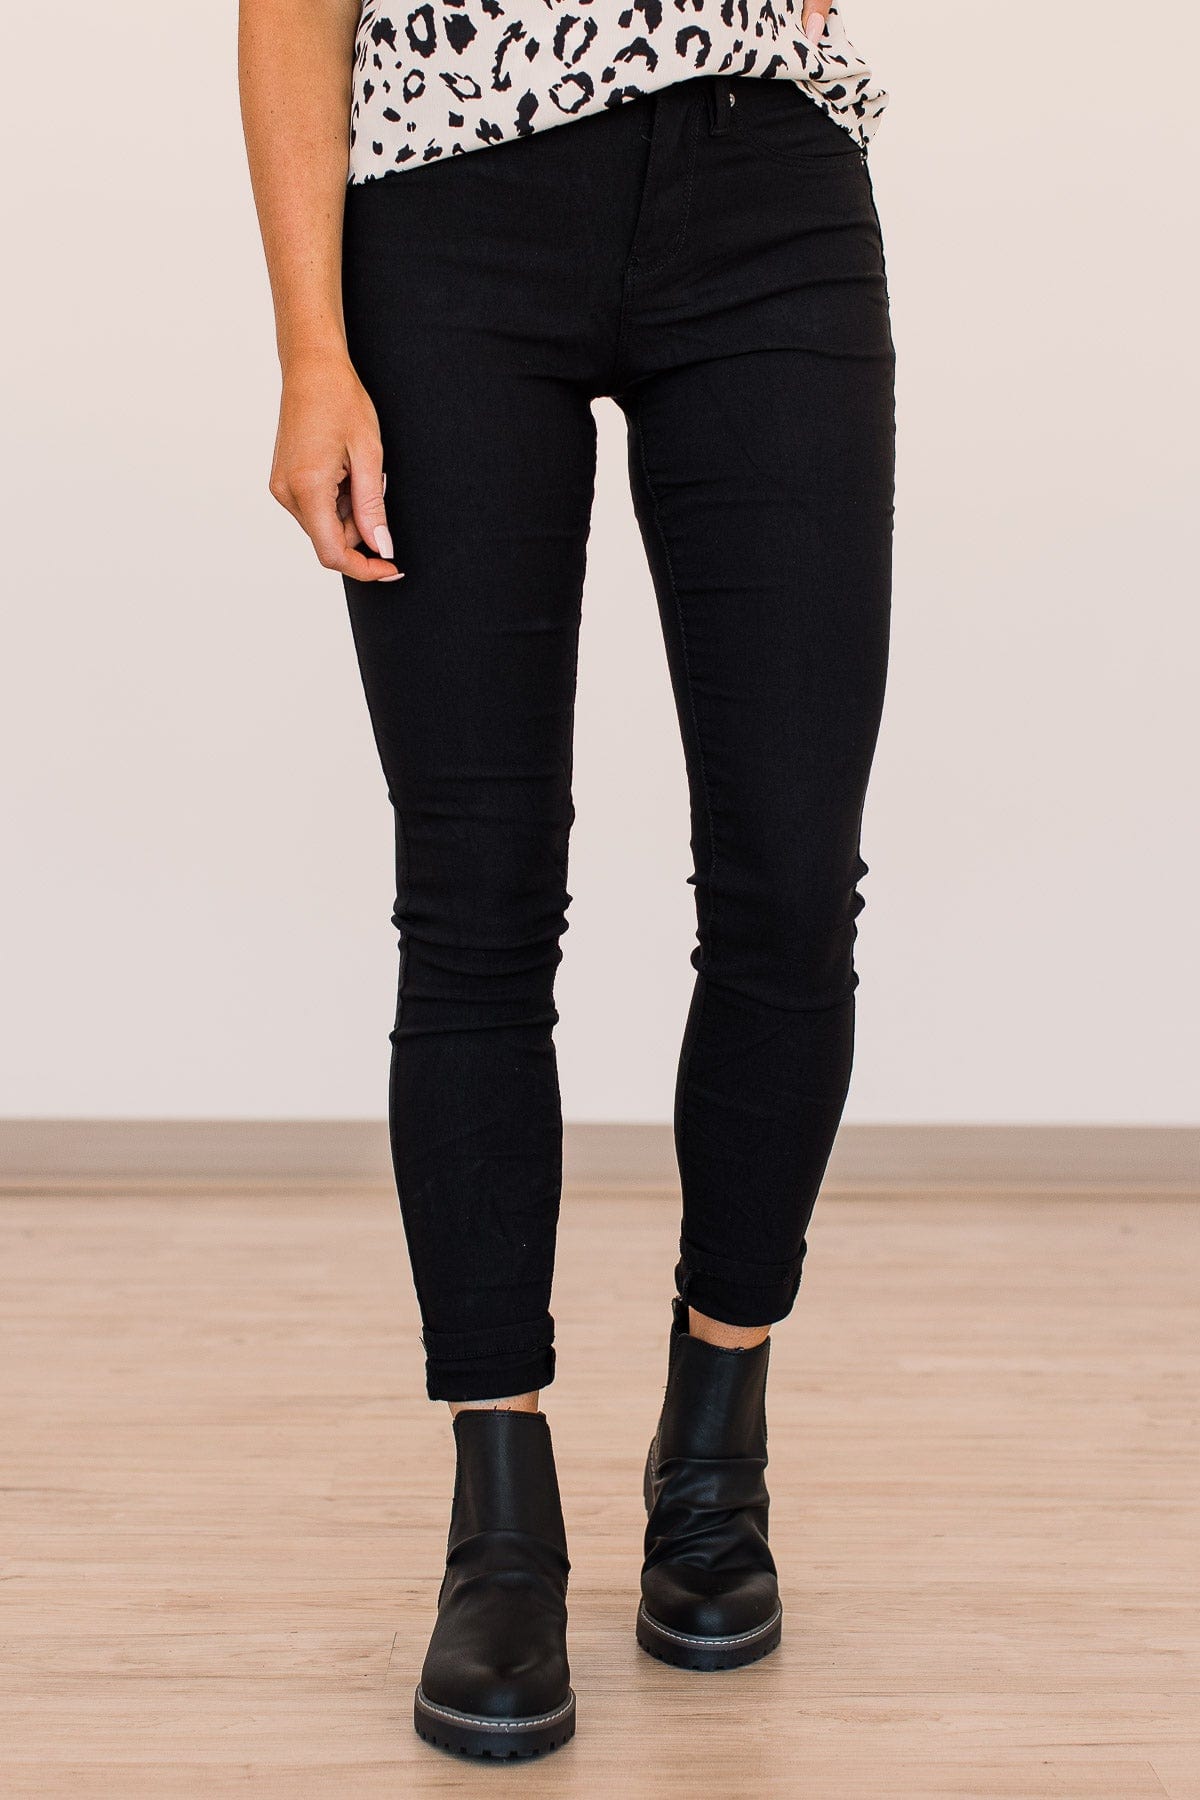 YMI Mid-Rise Jeggings- Helena Wash – The Pulse Boutique